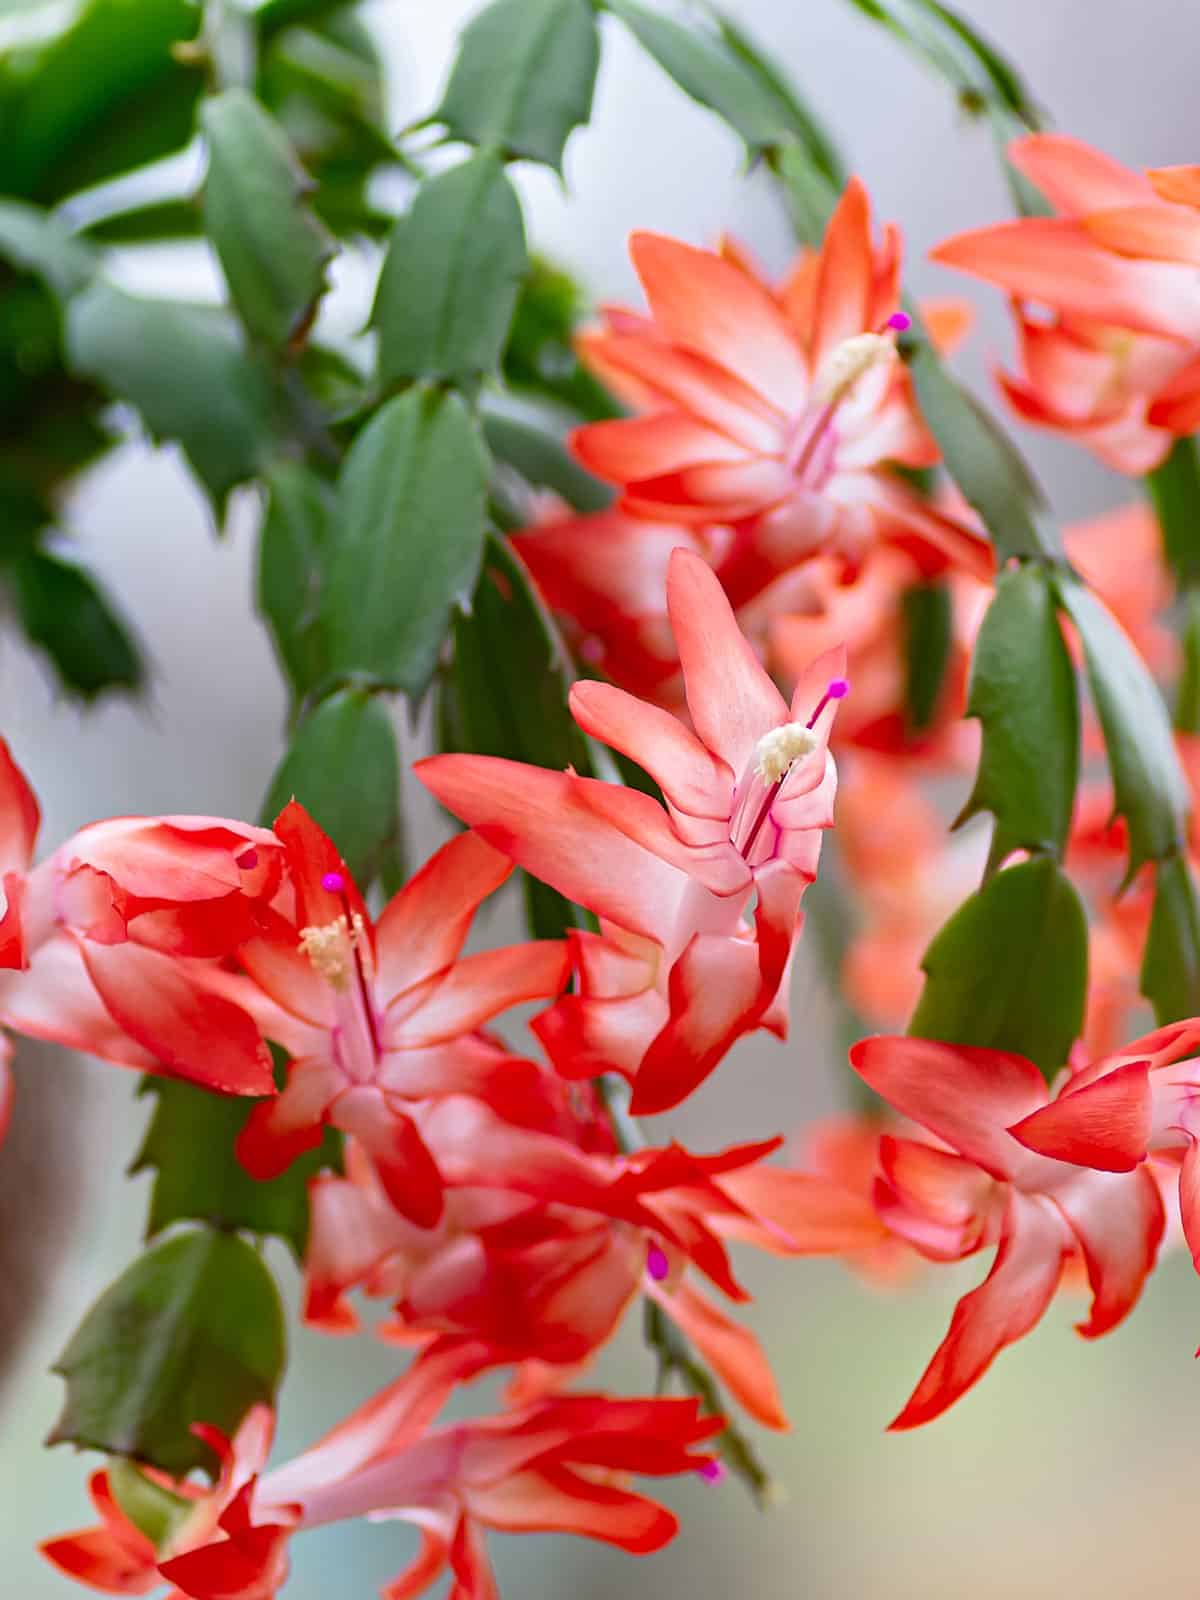 Bright red and white gradient colors of a Christmas Cactus